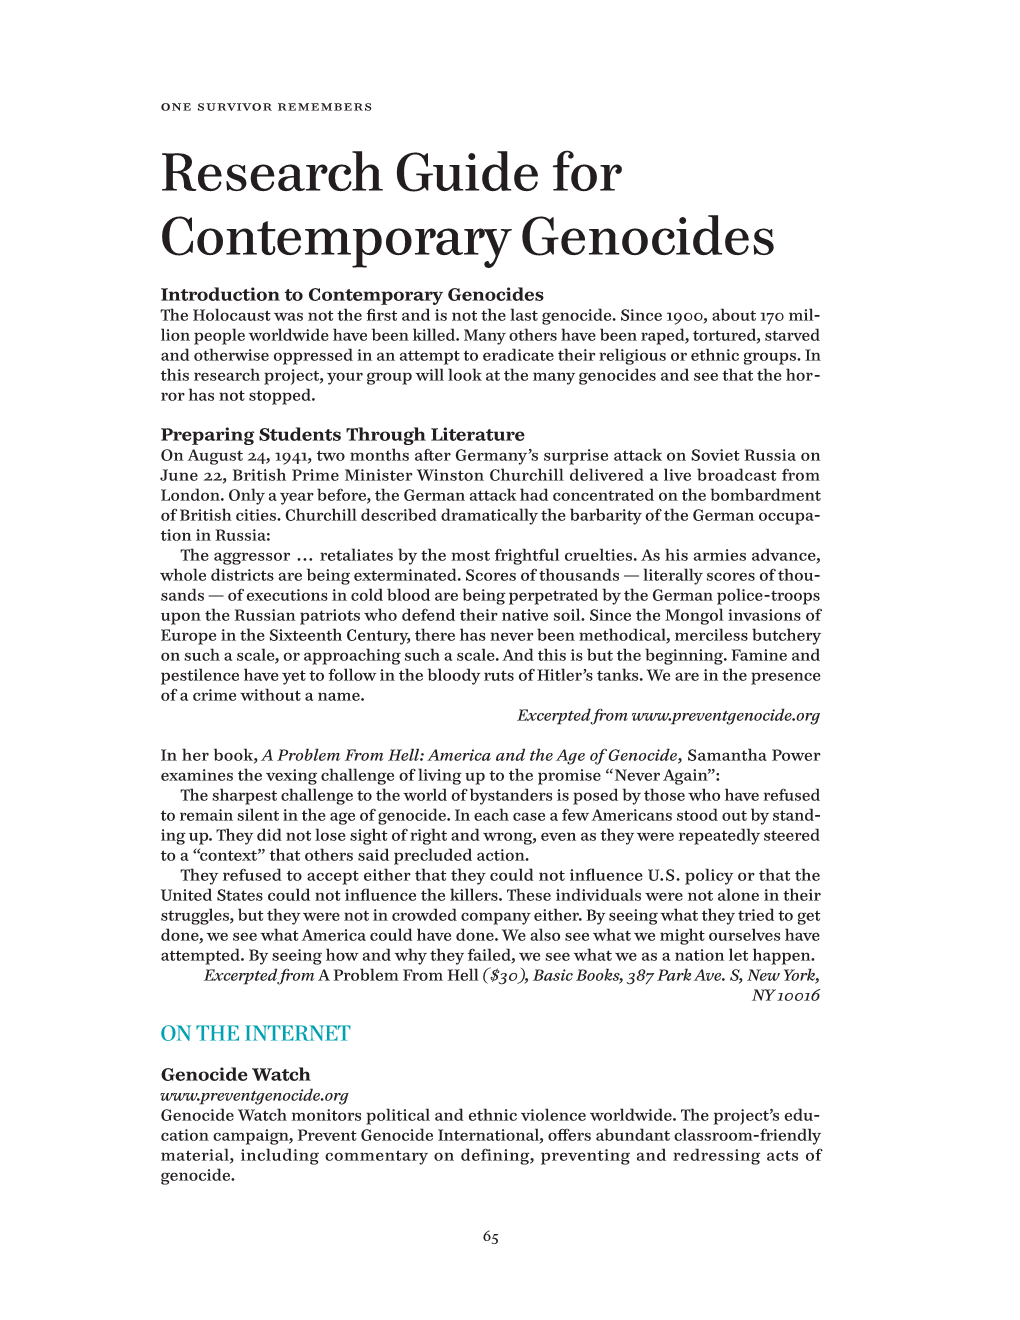 Research Guide for Contemporary Genocides